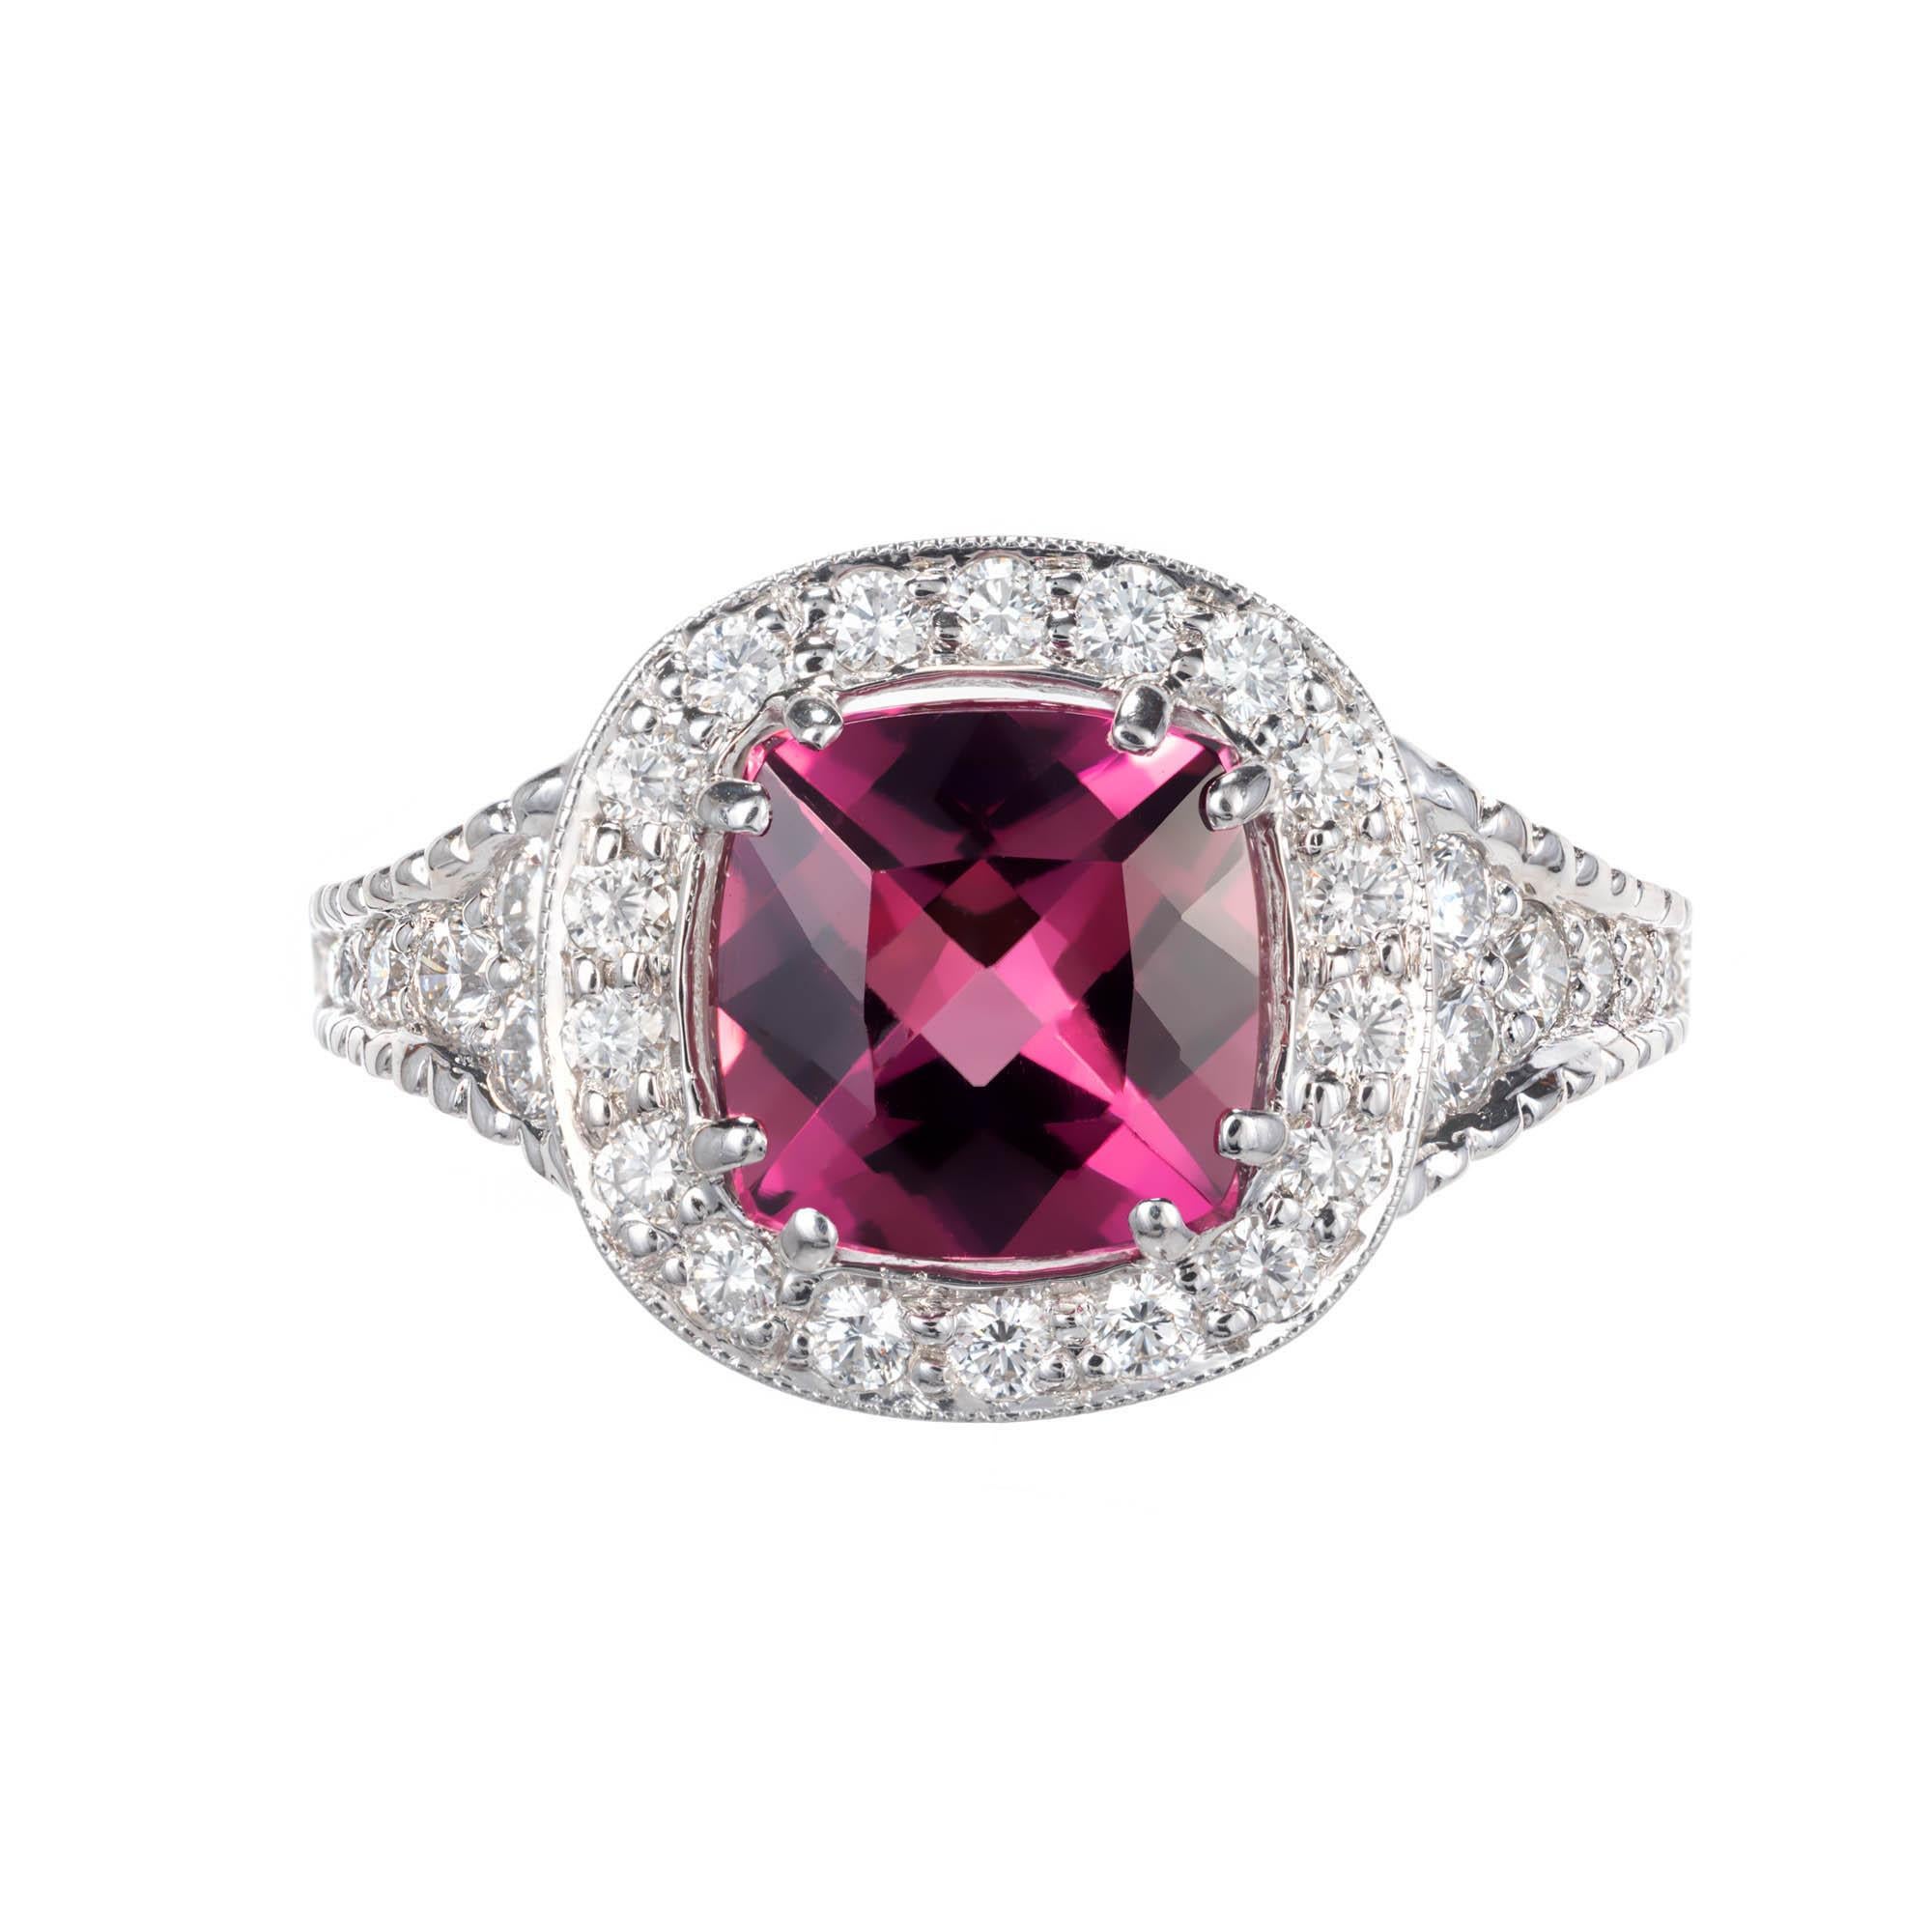 18k white gold Tourmaline & Diamond  engagement ring. Cushion shaped pink Tourmaline surrounded by a cushion shaped halo of round brilliant cut Diamonds accented with graduating sides of round brilliant cut Diamonds in the band. Filigree under